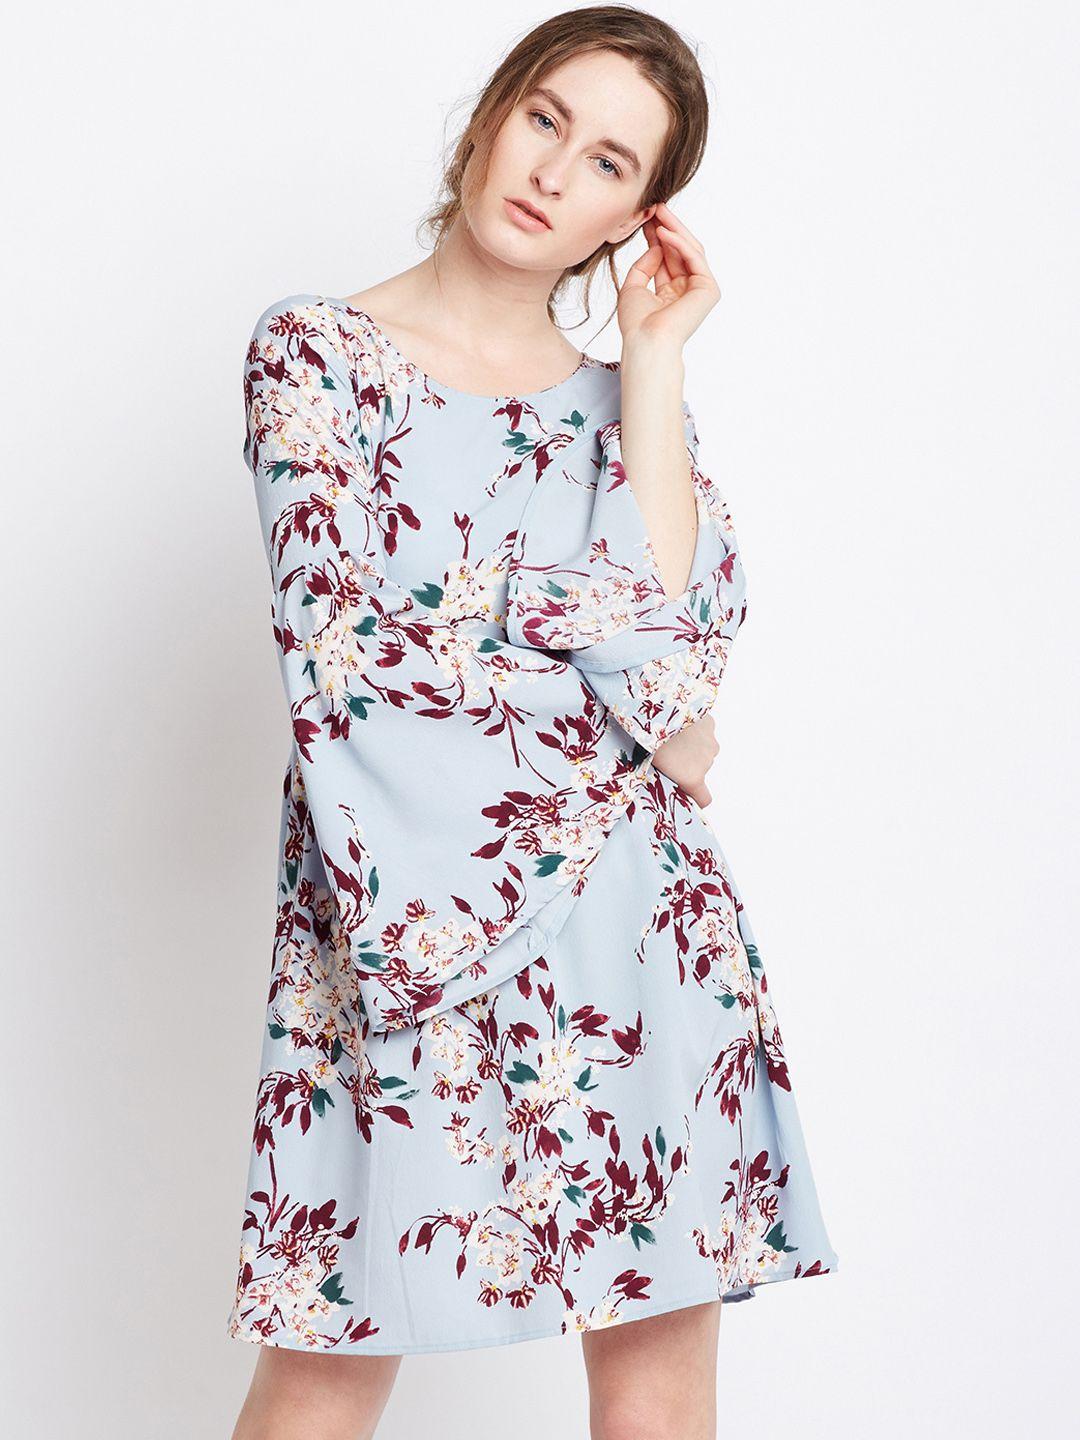 berrylush women blue floral print fit and flare dress